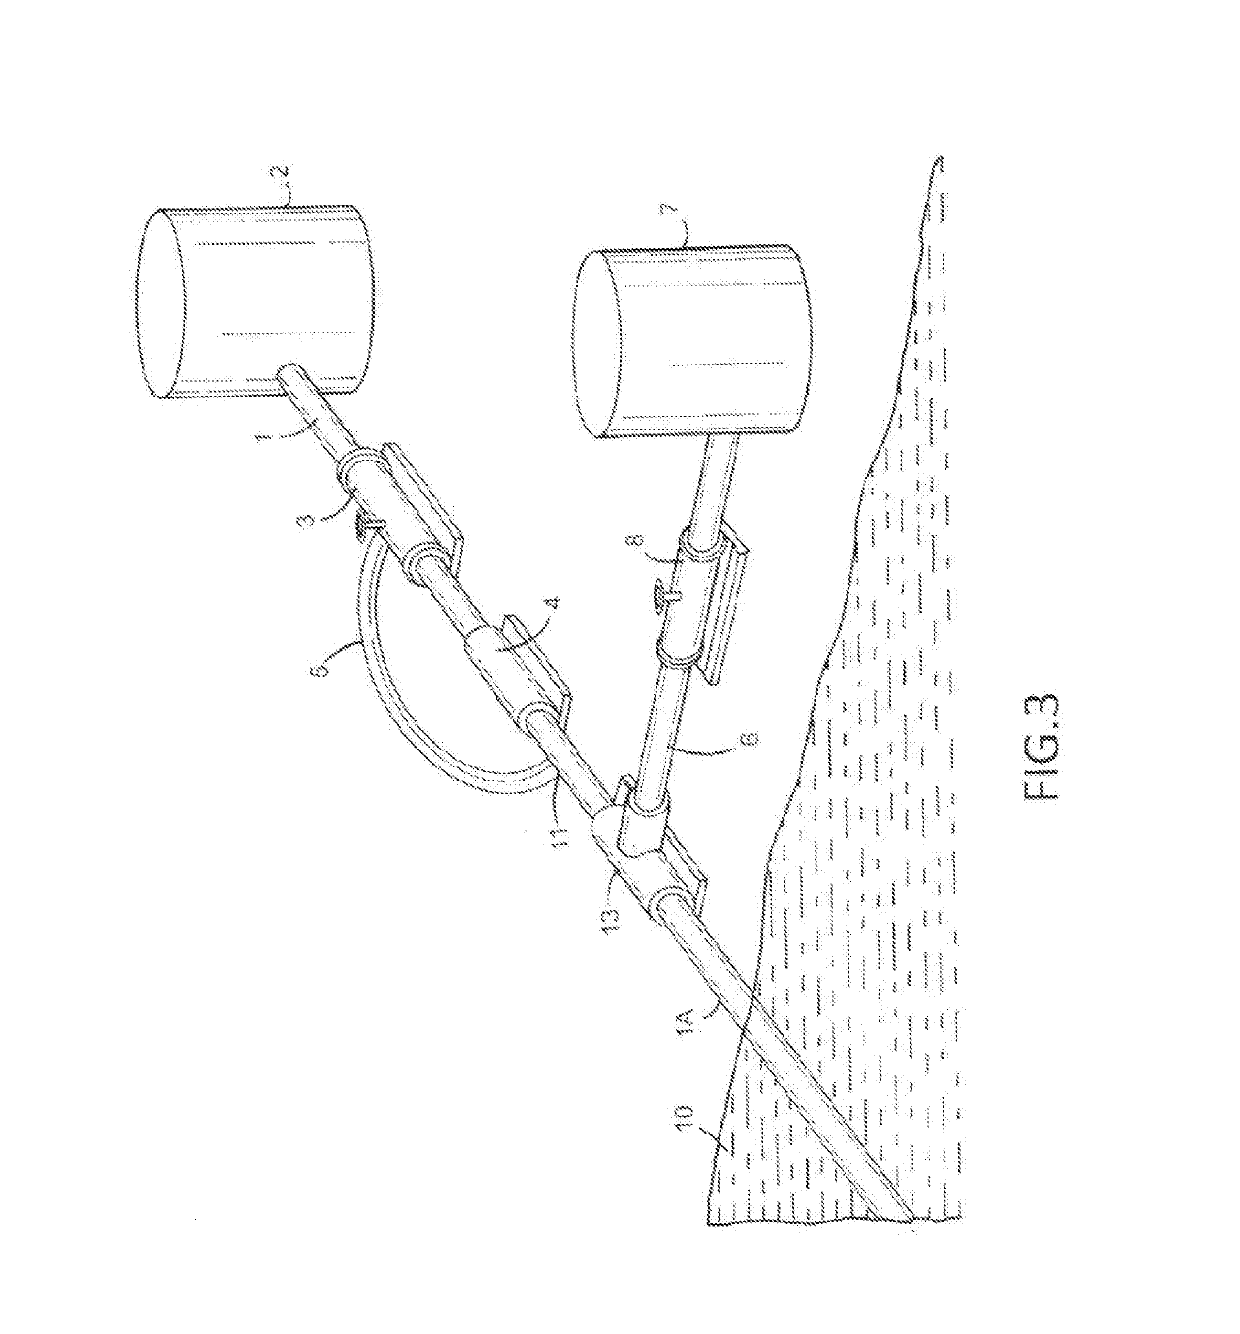 Method for preventing spills resulting from pipeline failures